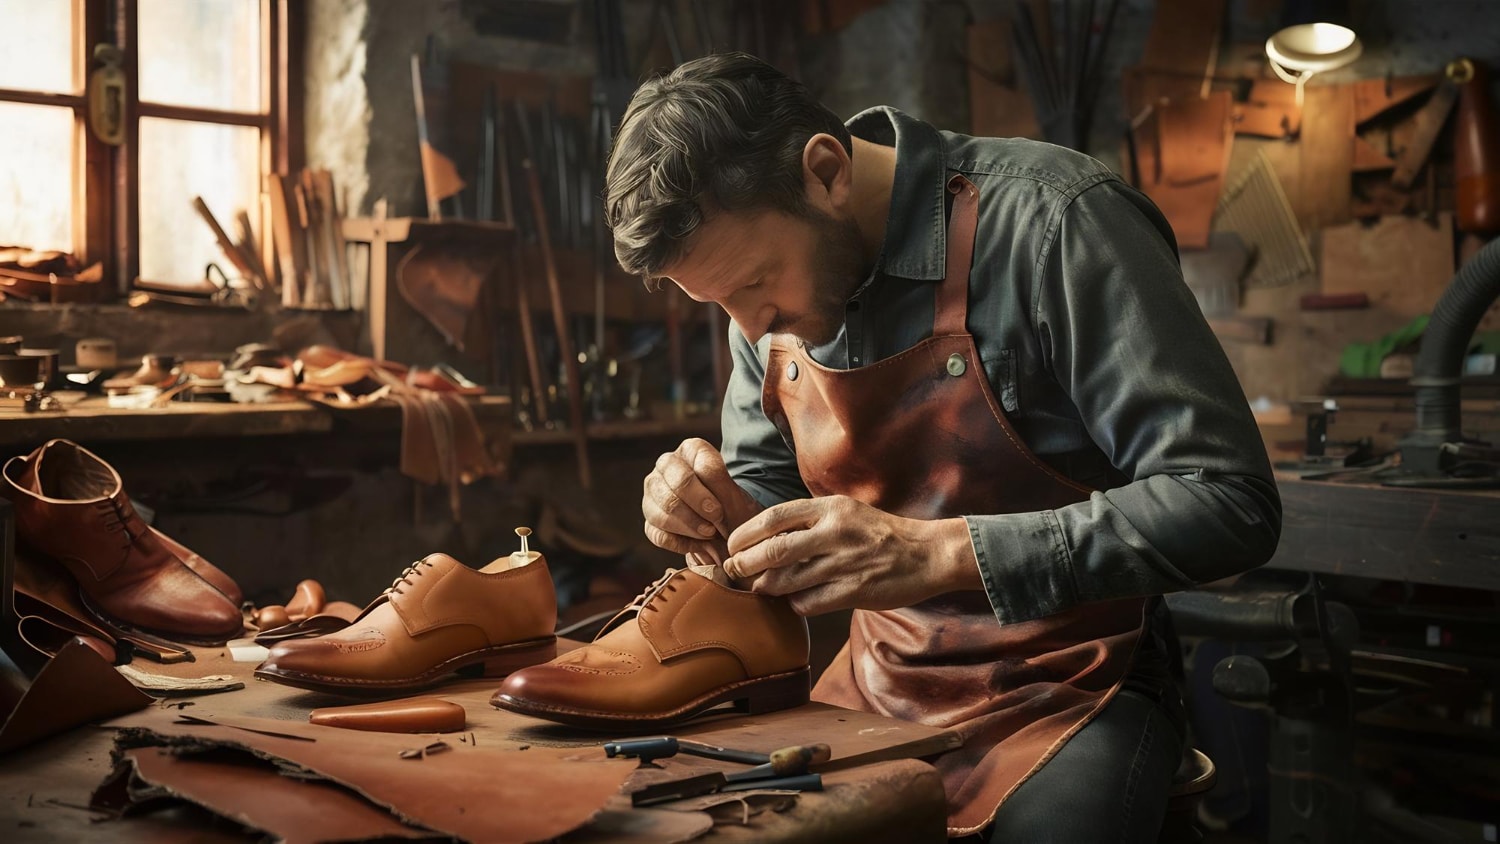 Clarks Craftsmanship and Comfort Combined